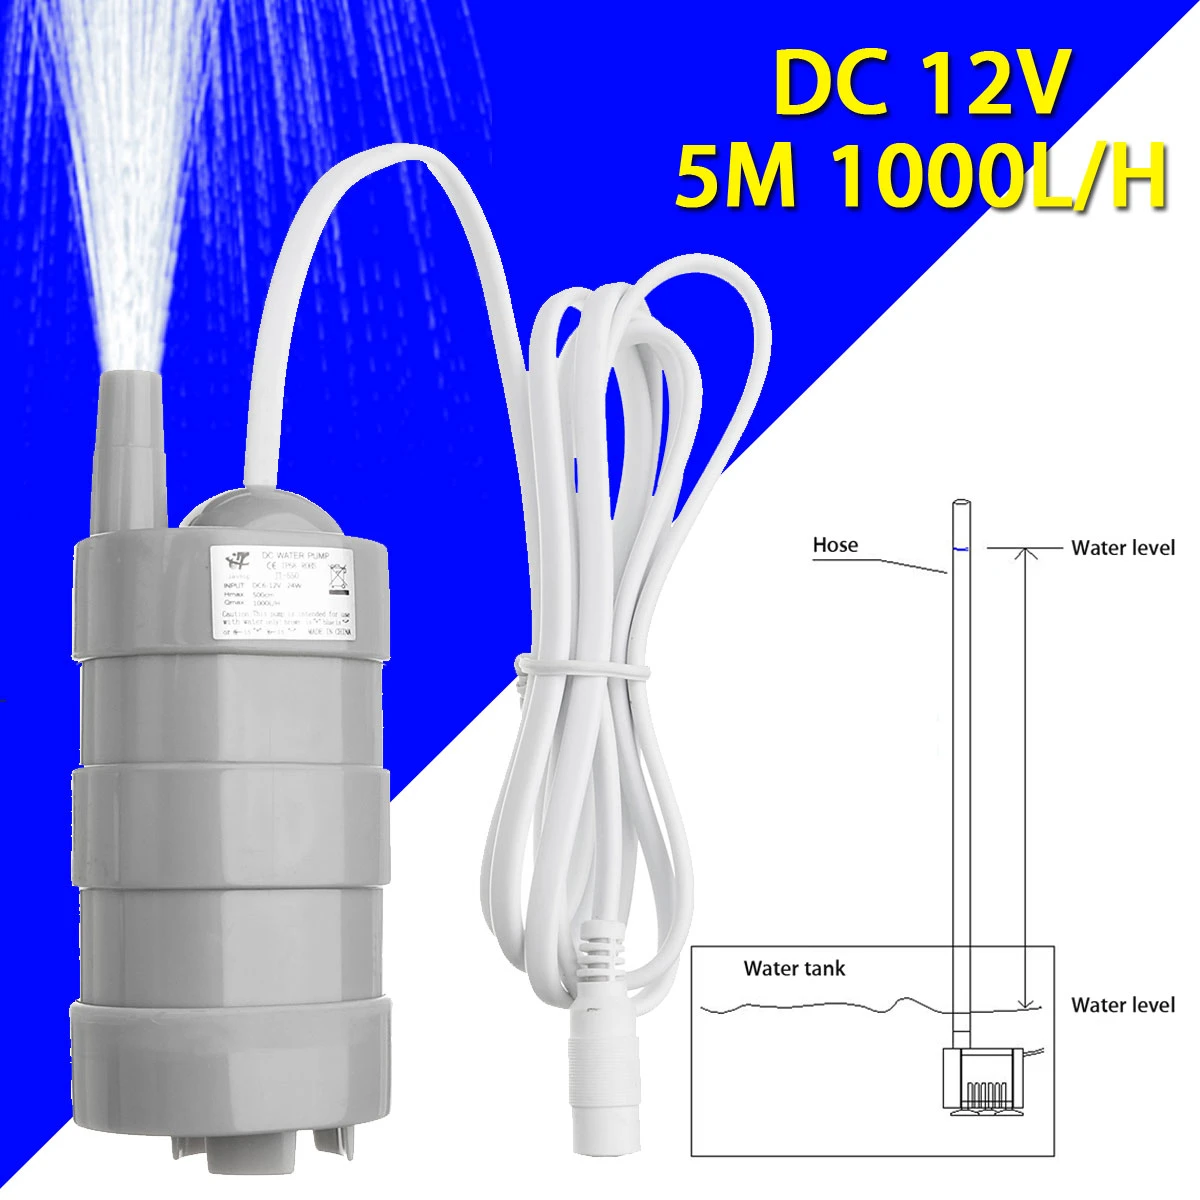 DC 12V Water Pump for Fish Tank Magnetic Submersible Water Pump 5M 600 1000L/H Fish Pond Garden Boat Water Pump Tank Fountain